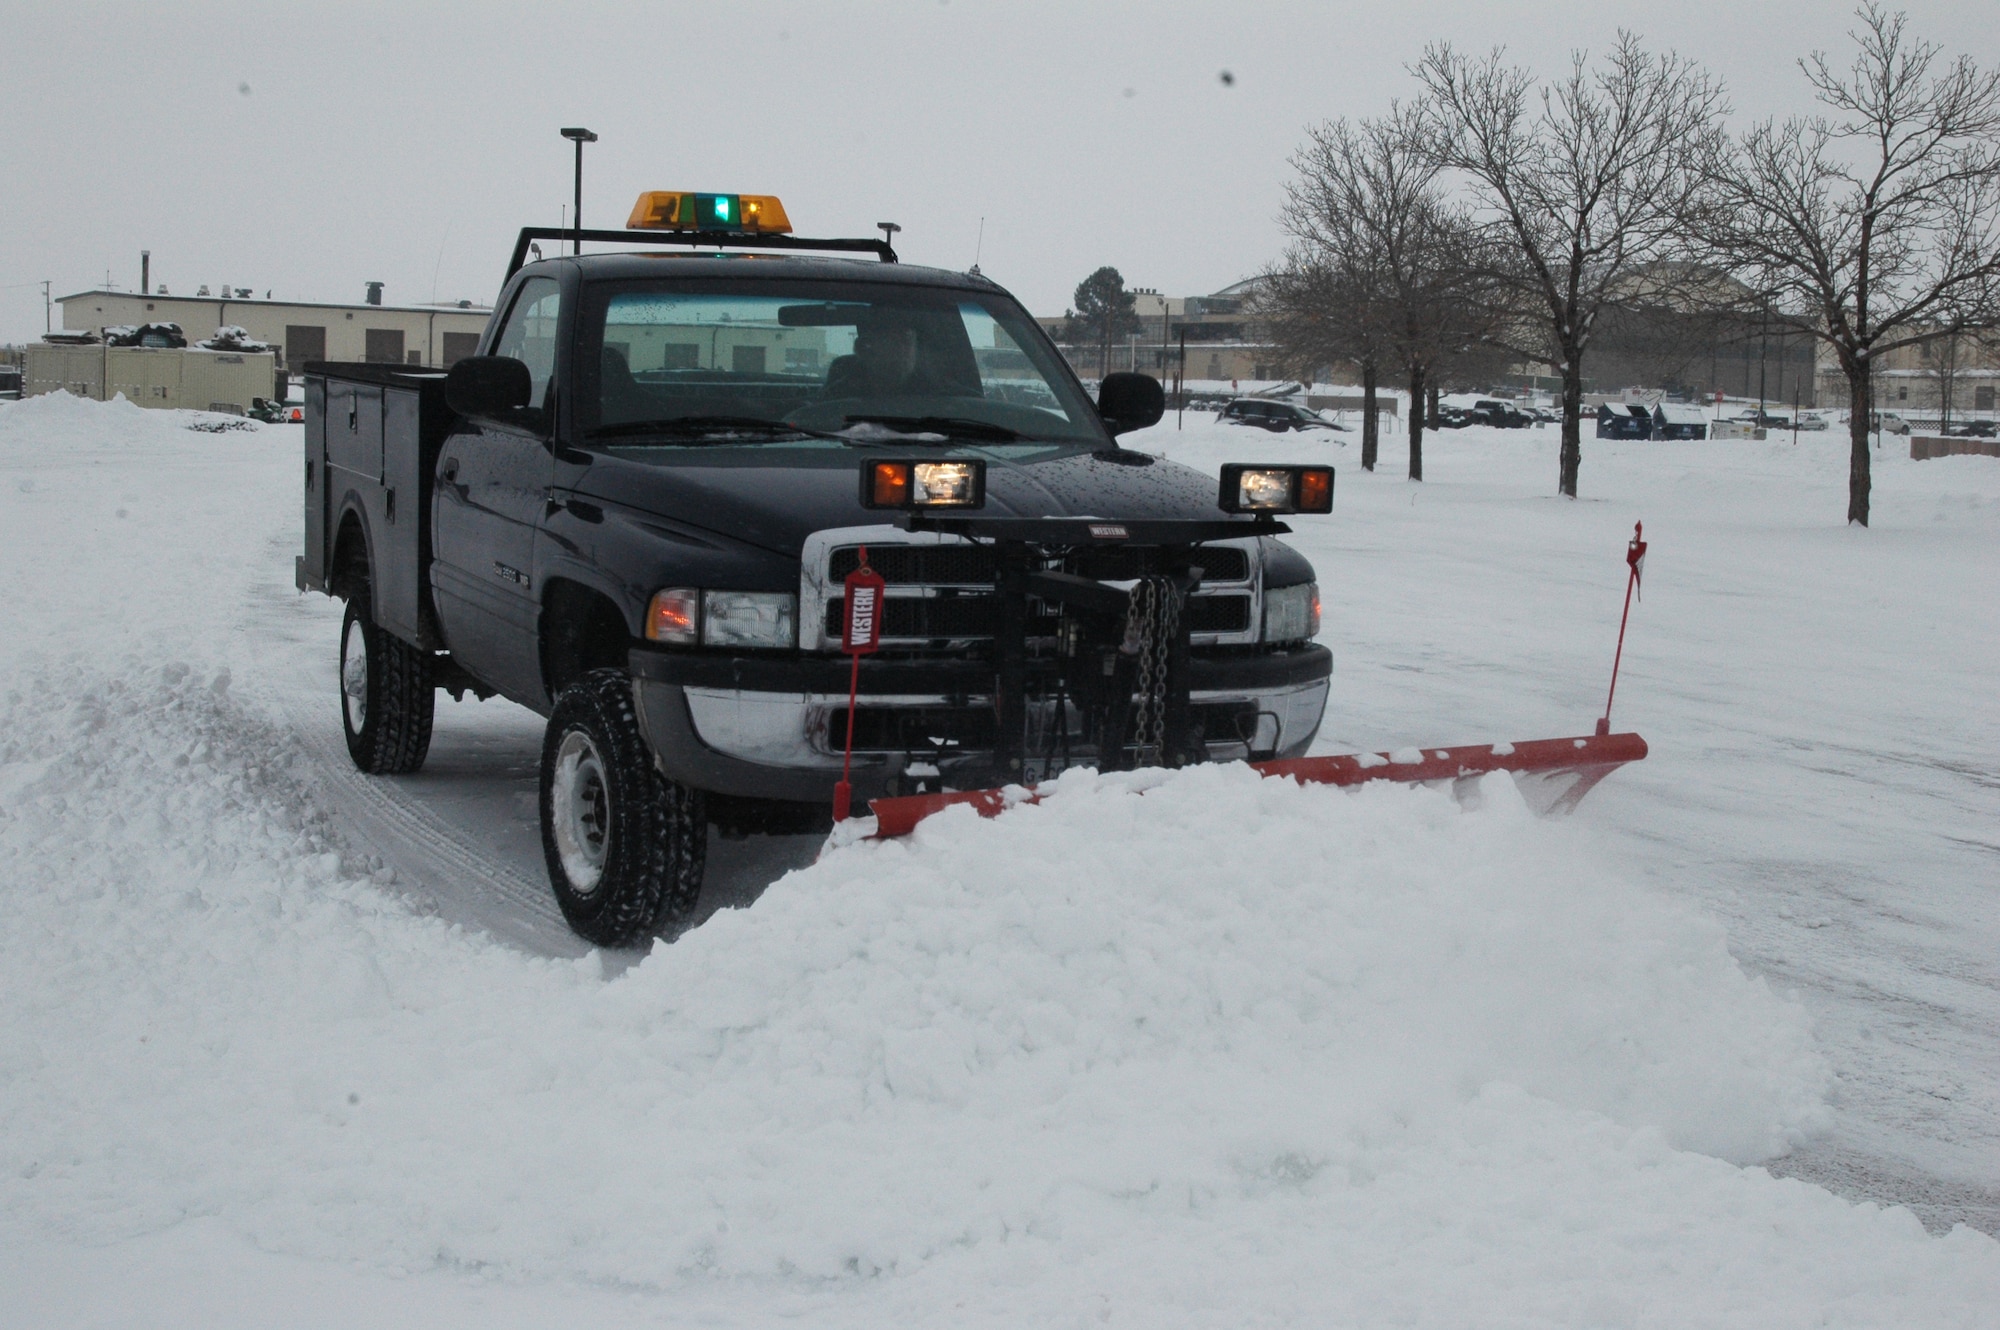 Mr. Tom Sorrell, from the 140th Civil Engineer Squadron, pushes snow to the sides of the parking lot at the 140th Wing headquarters building at Buckley Air Force Base Dec. 27. (U.S. Air Force photo by Capt. Adrianne Michele)